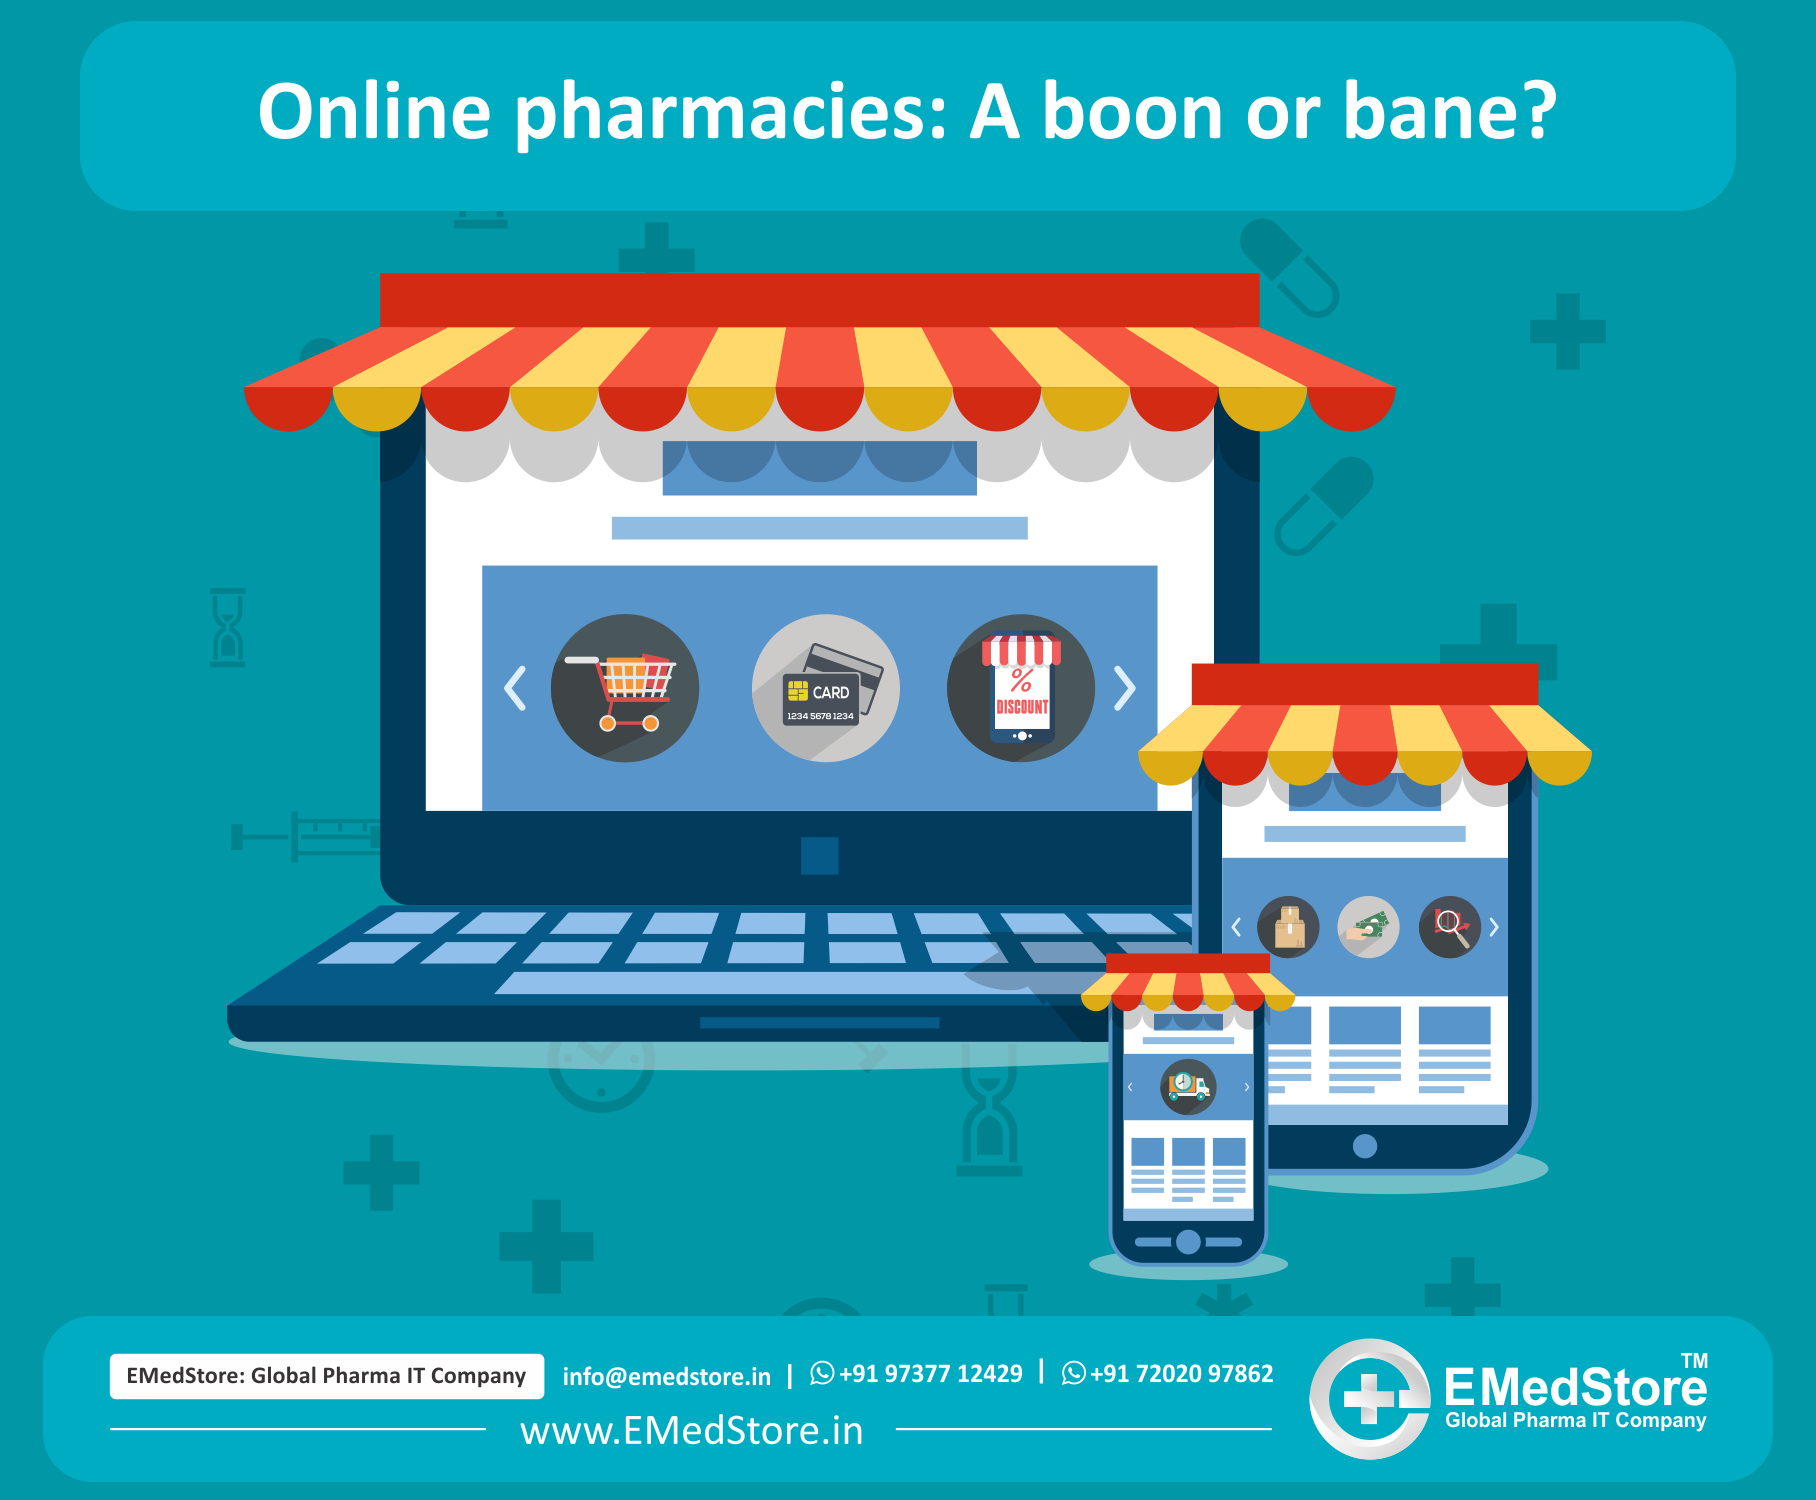 Why on demand pharmacy ordering and delivery apps